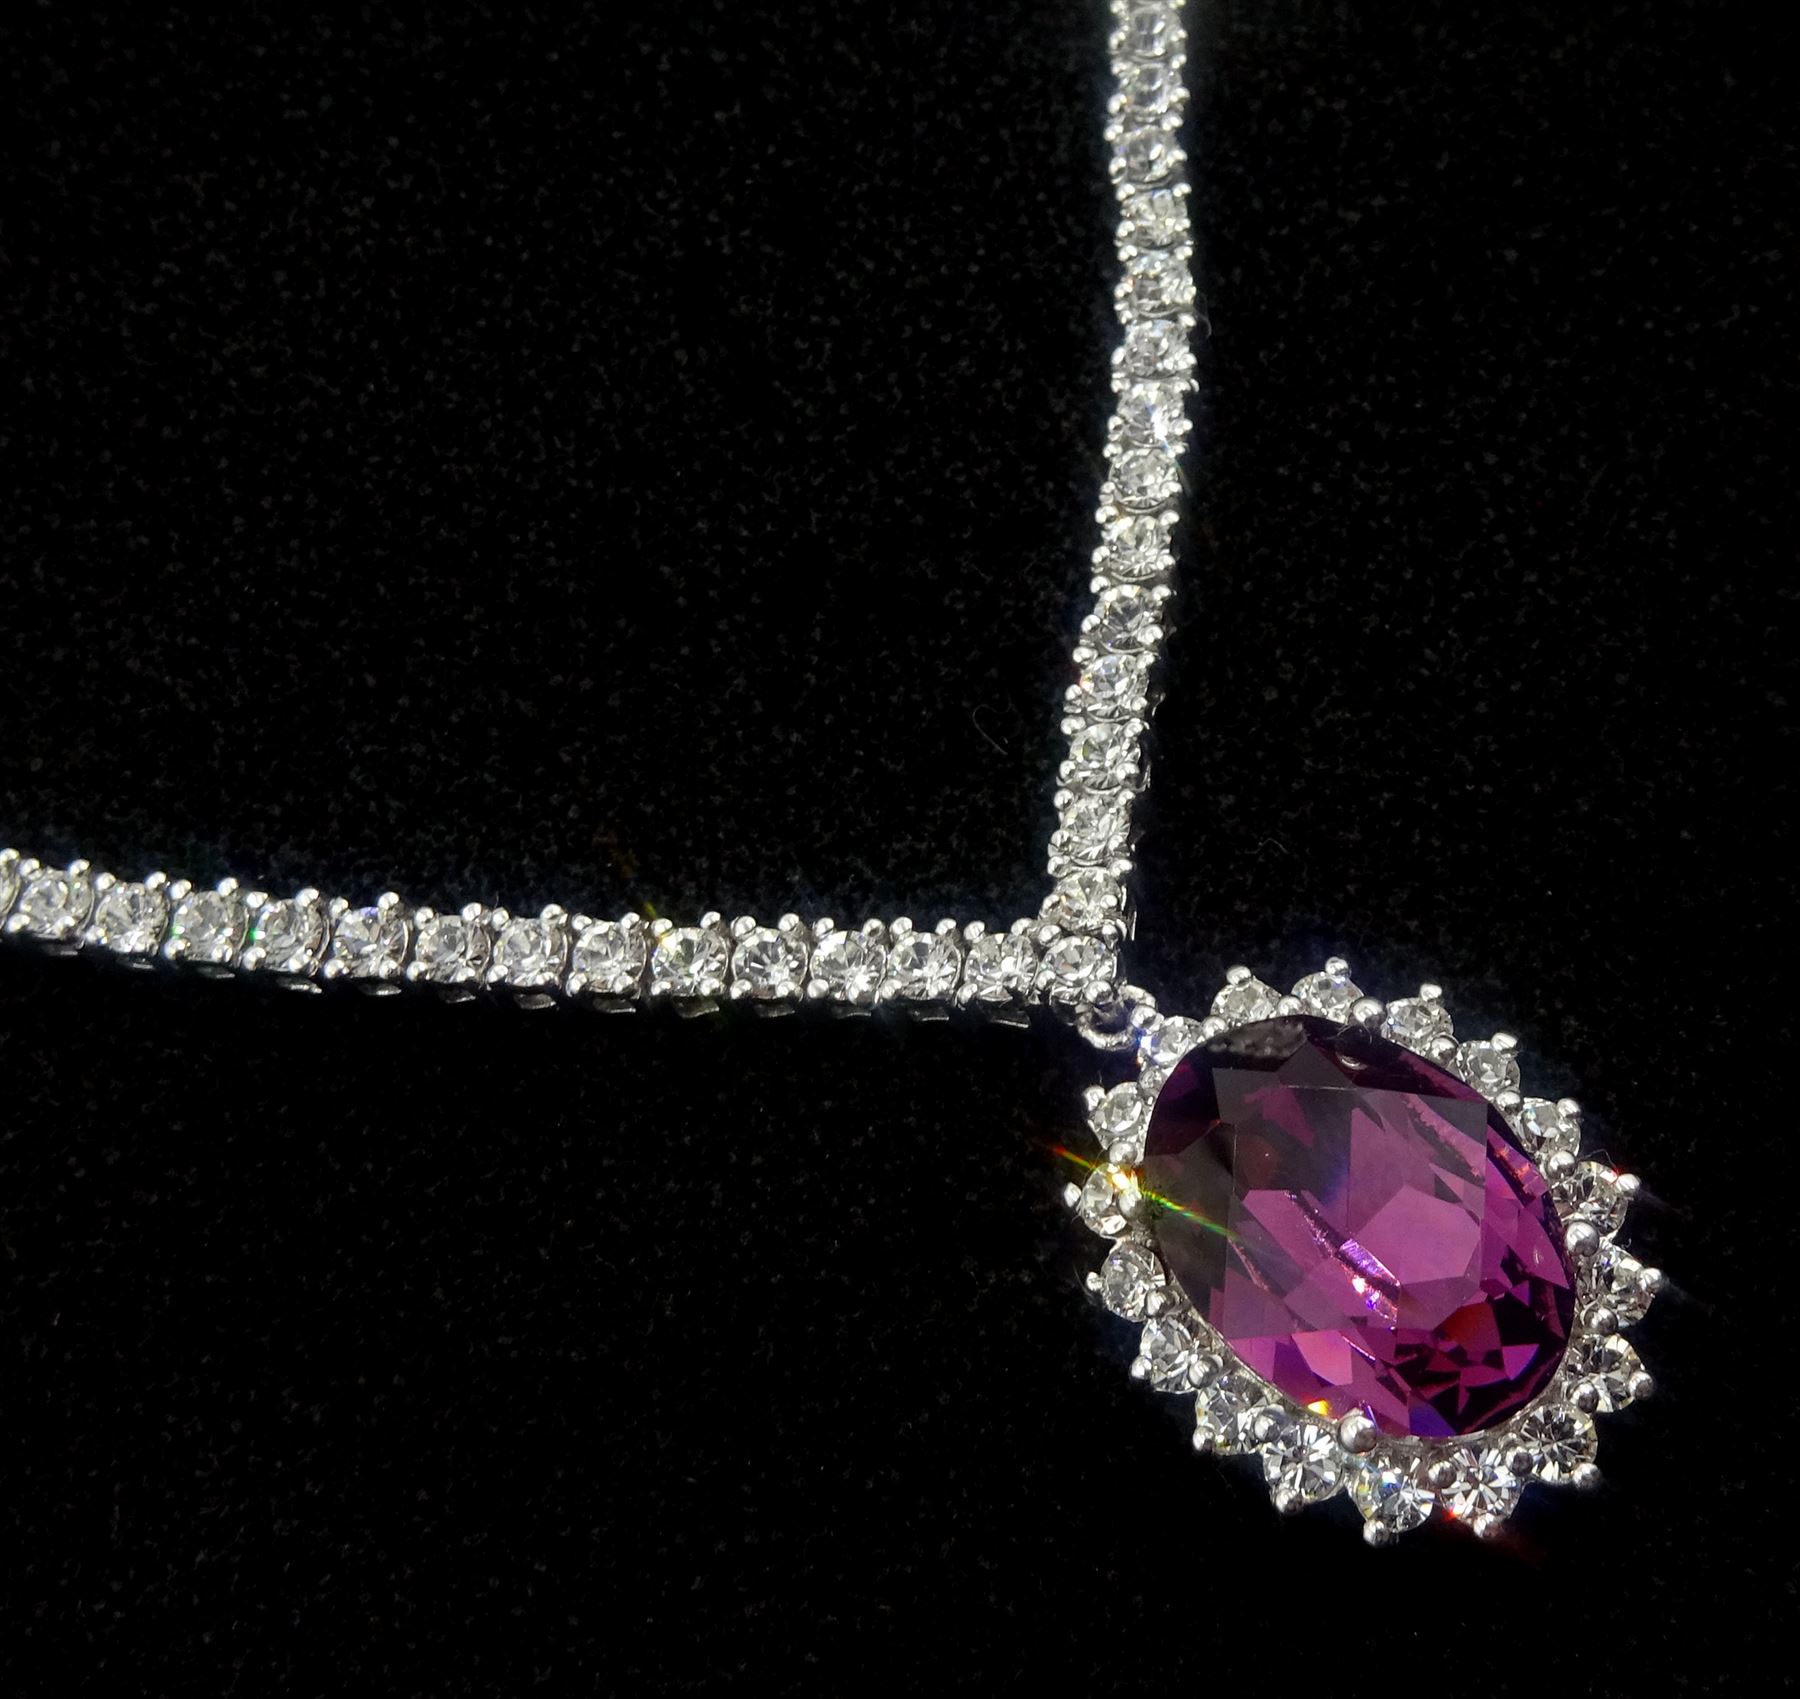 Silver cubic zirconia and purple stone set cluster pendant dress necklace - Image 5 of 5